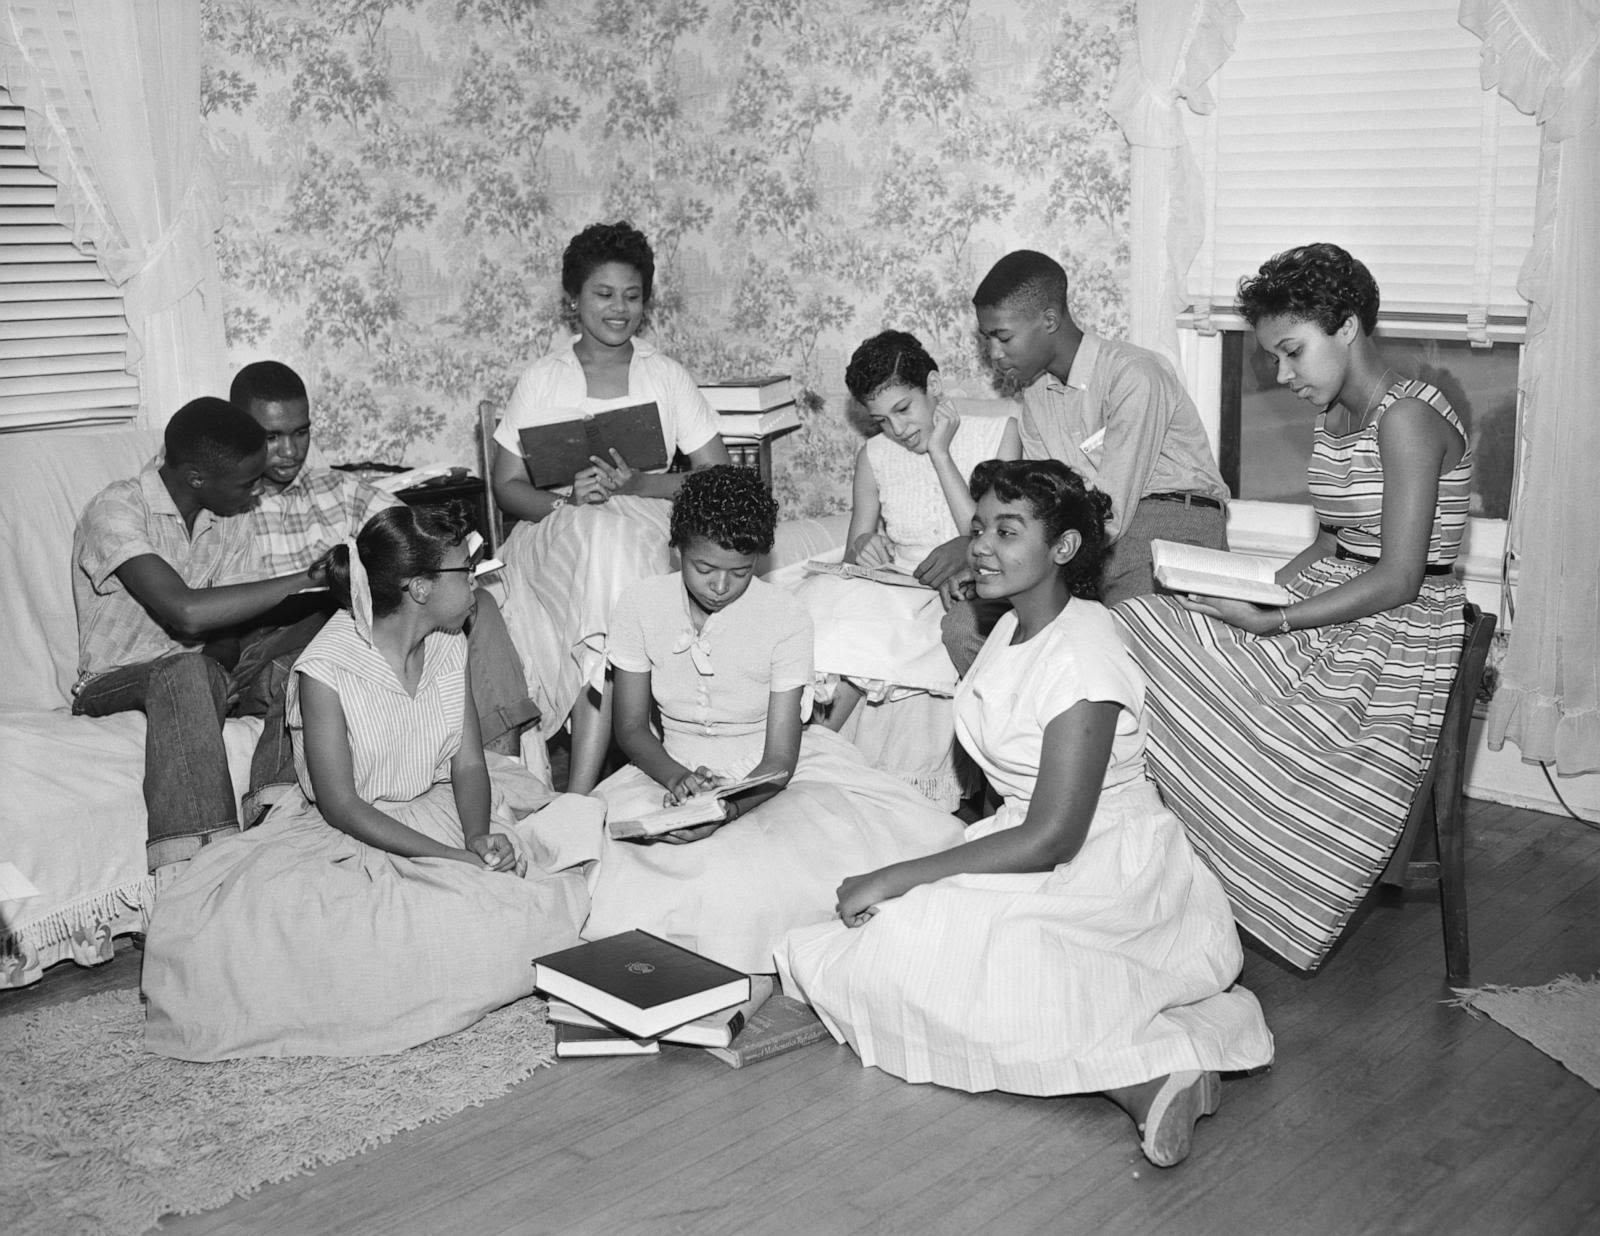 Exclusive: Members of 'Little Rock Nine' reflect on 70 years since Brown v. Board of Education